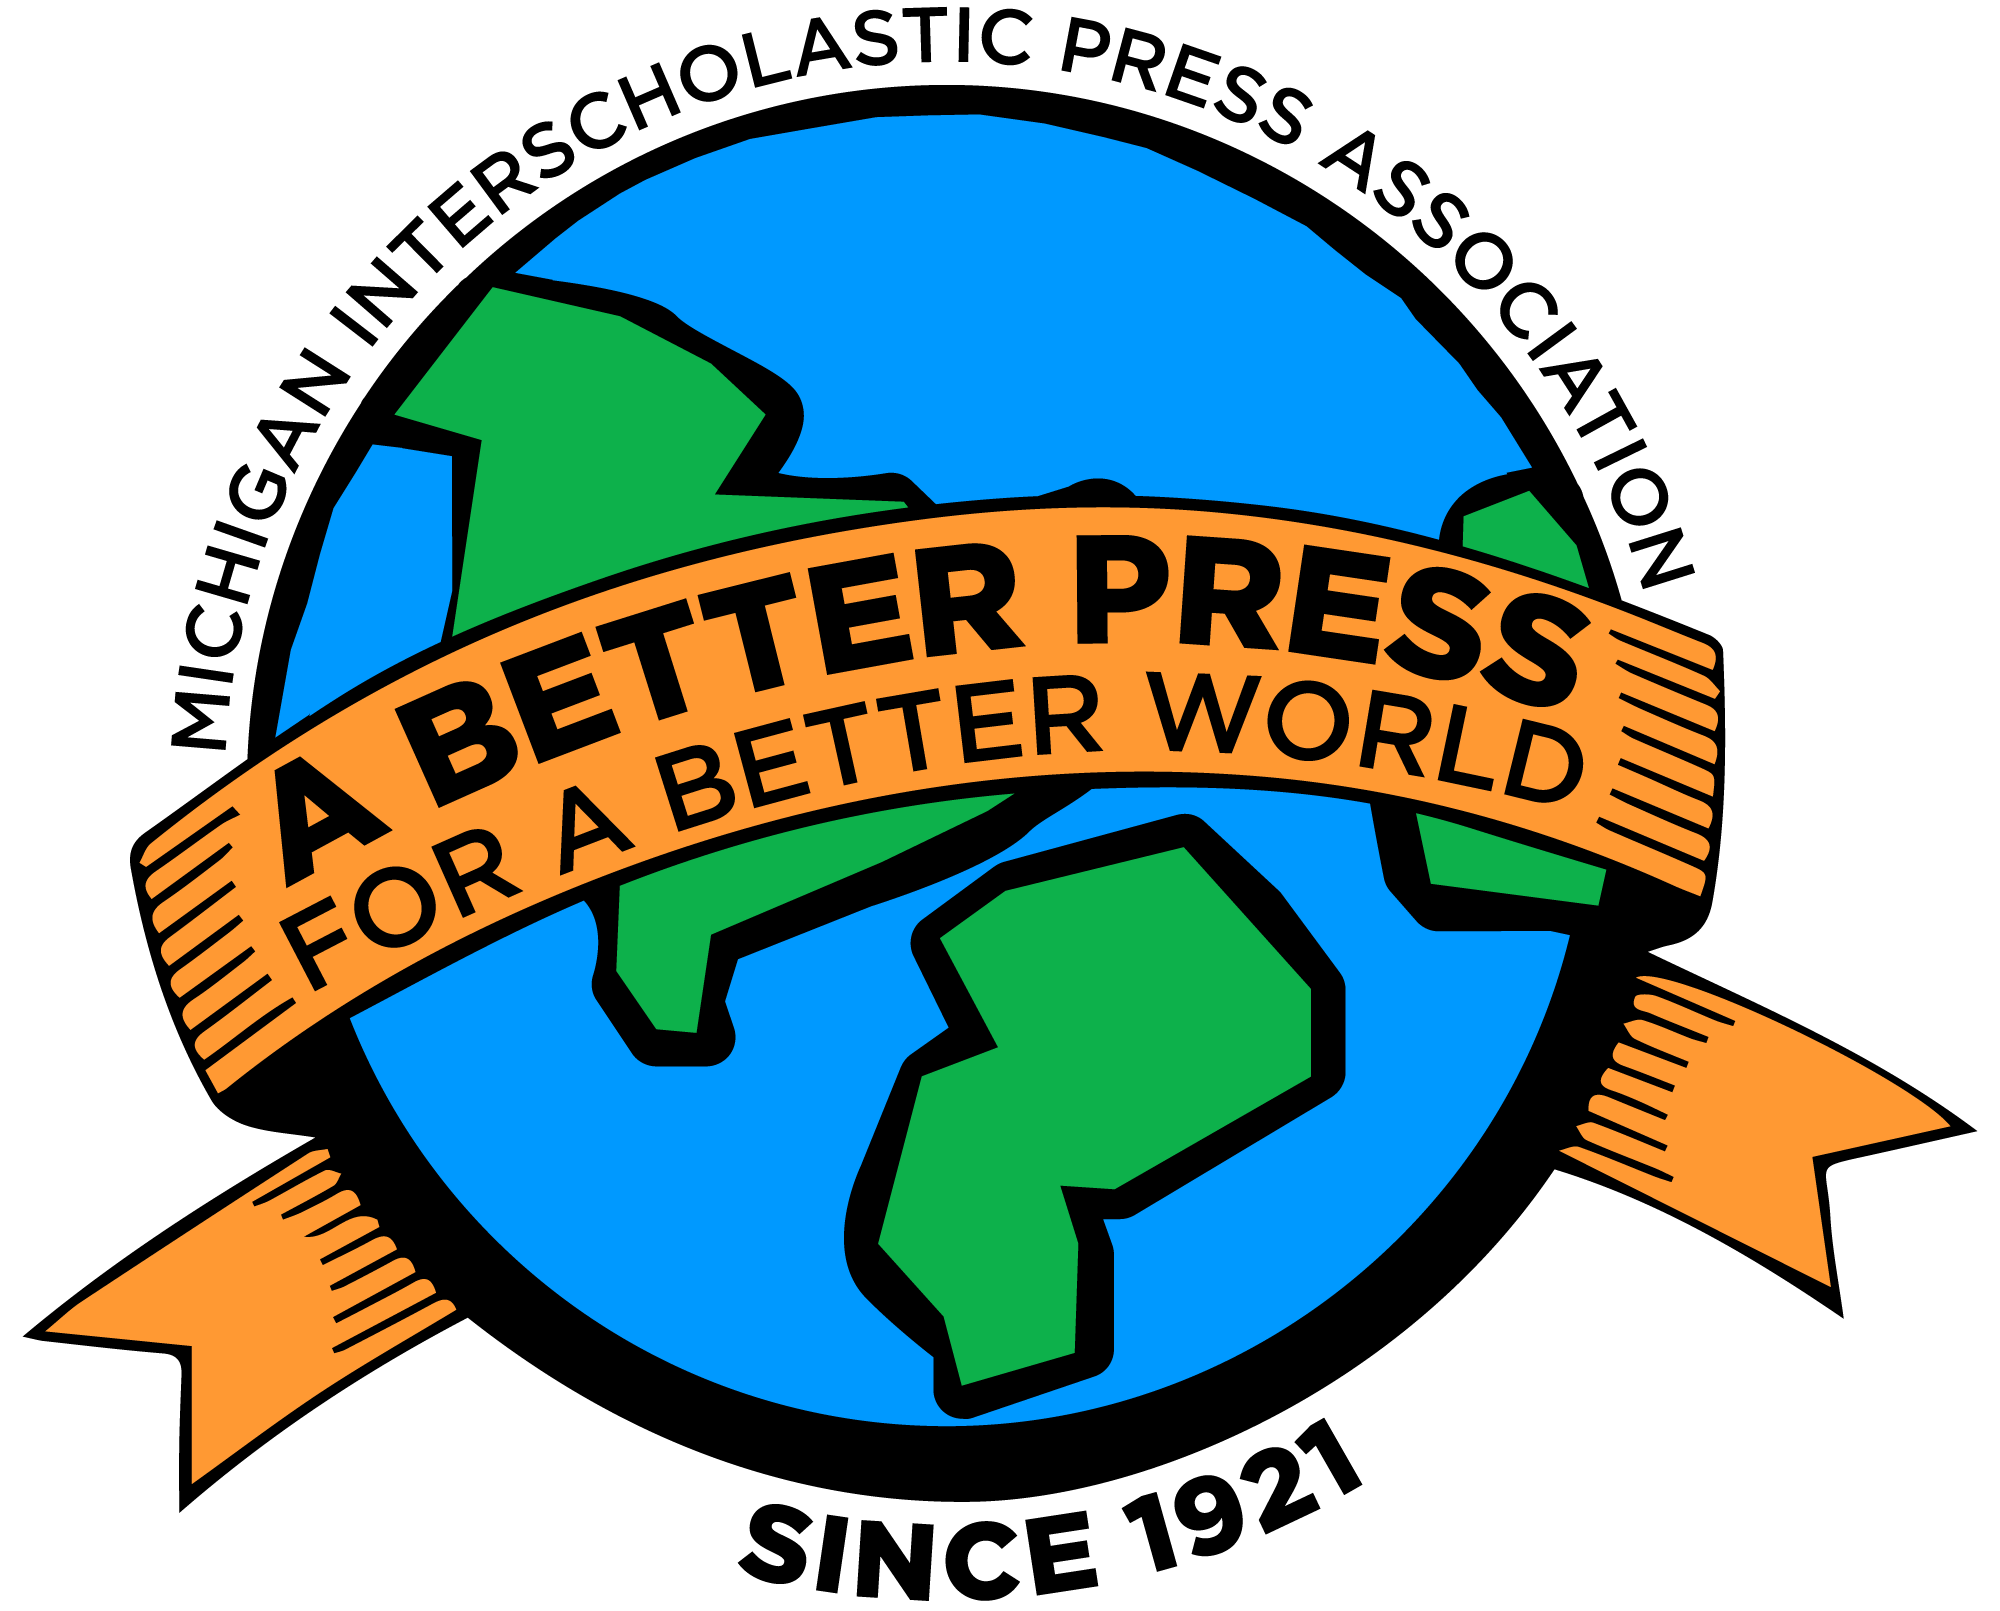 Drawing of the globe with a ribbon across it that says "A Better Press for a Better World," with Michigan Interscholastic Press Association since 1921 encircling the globe